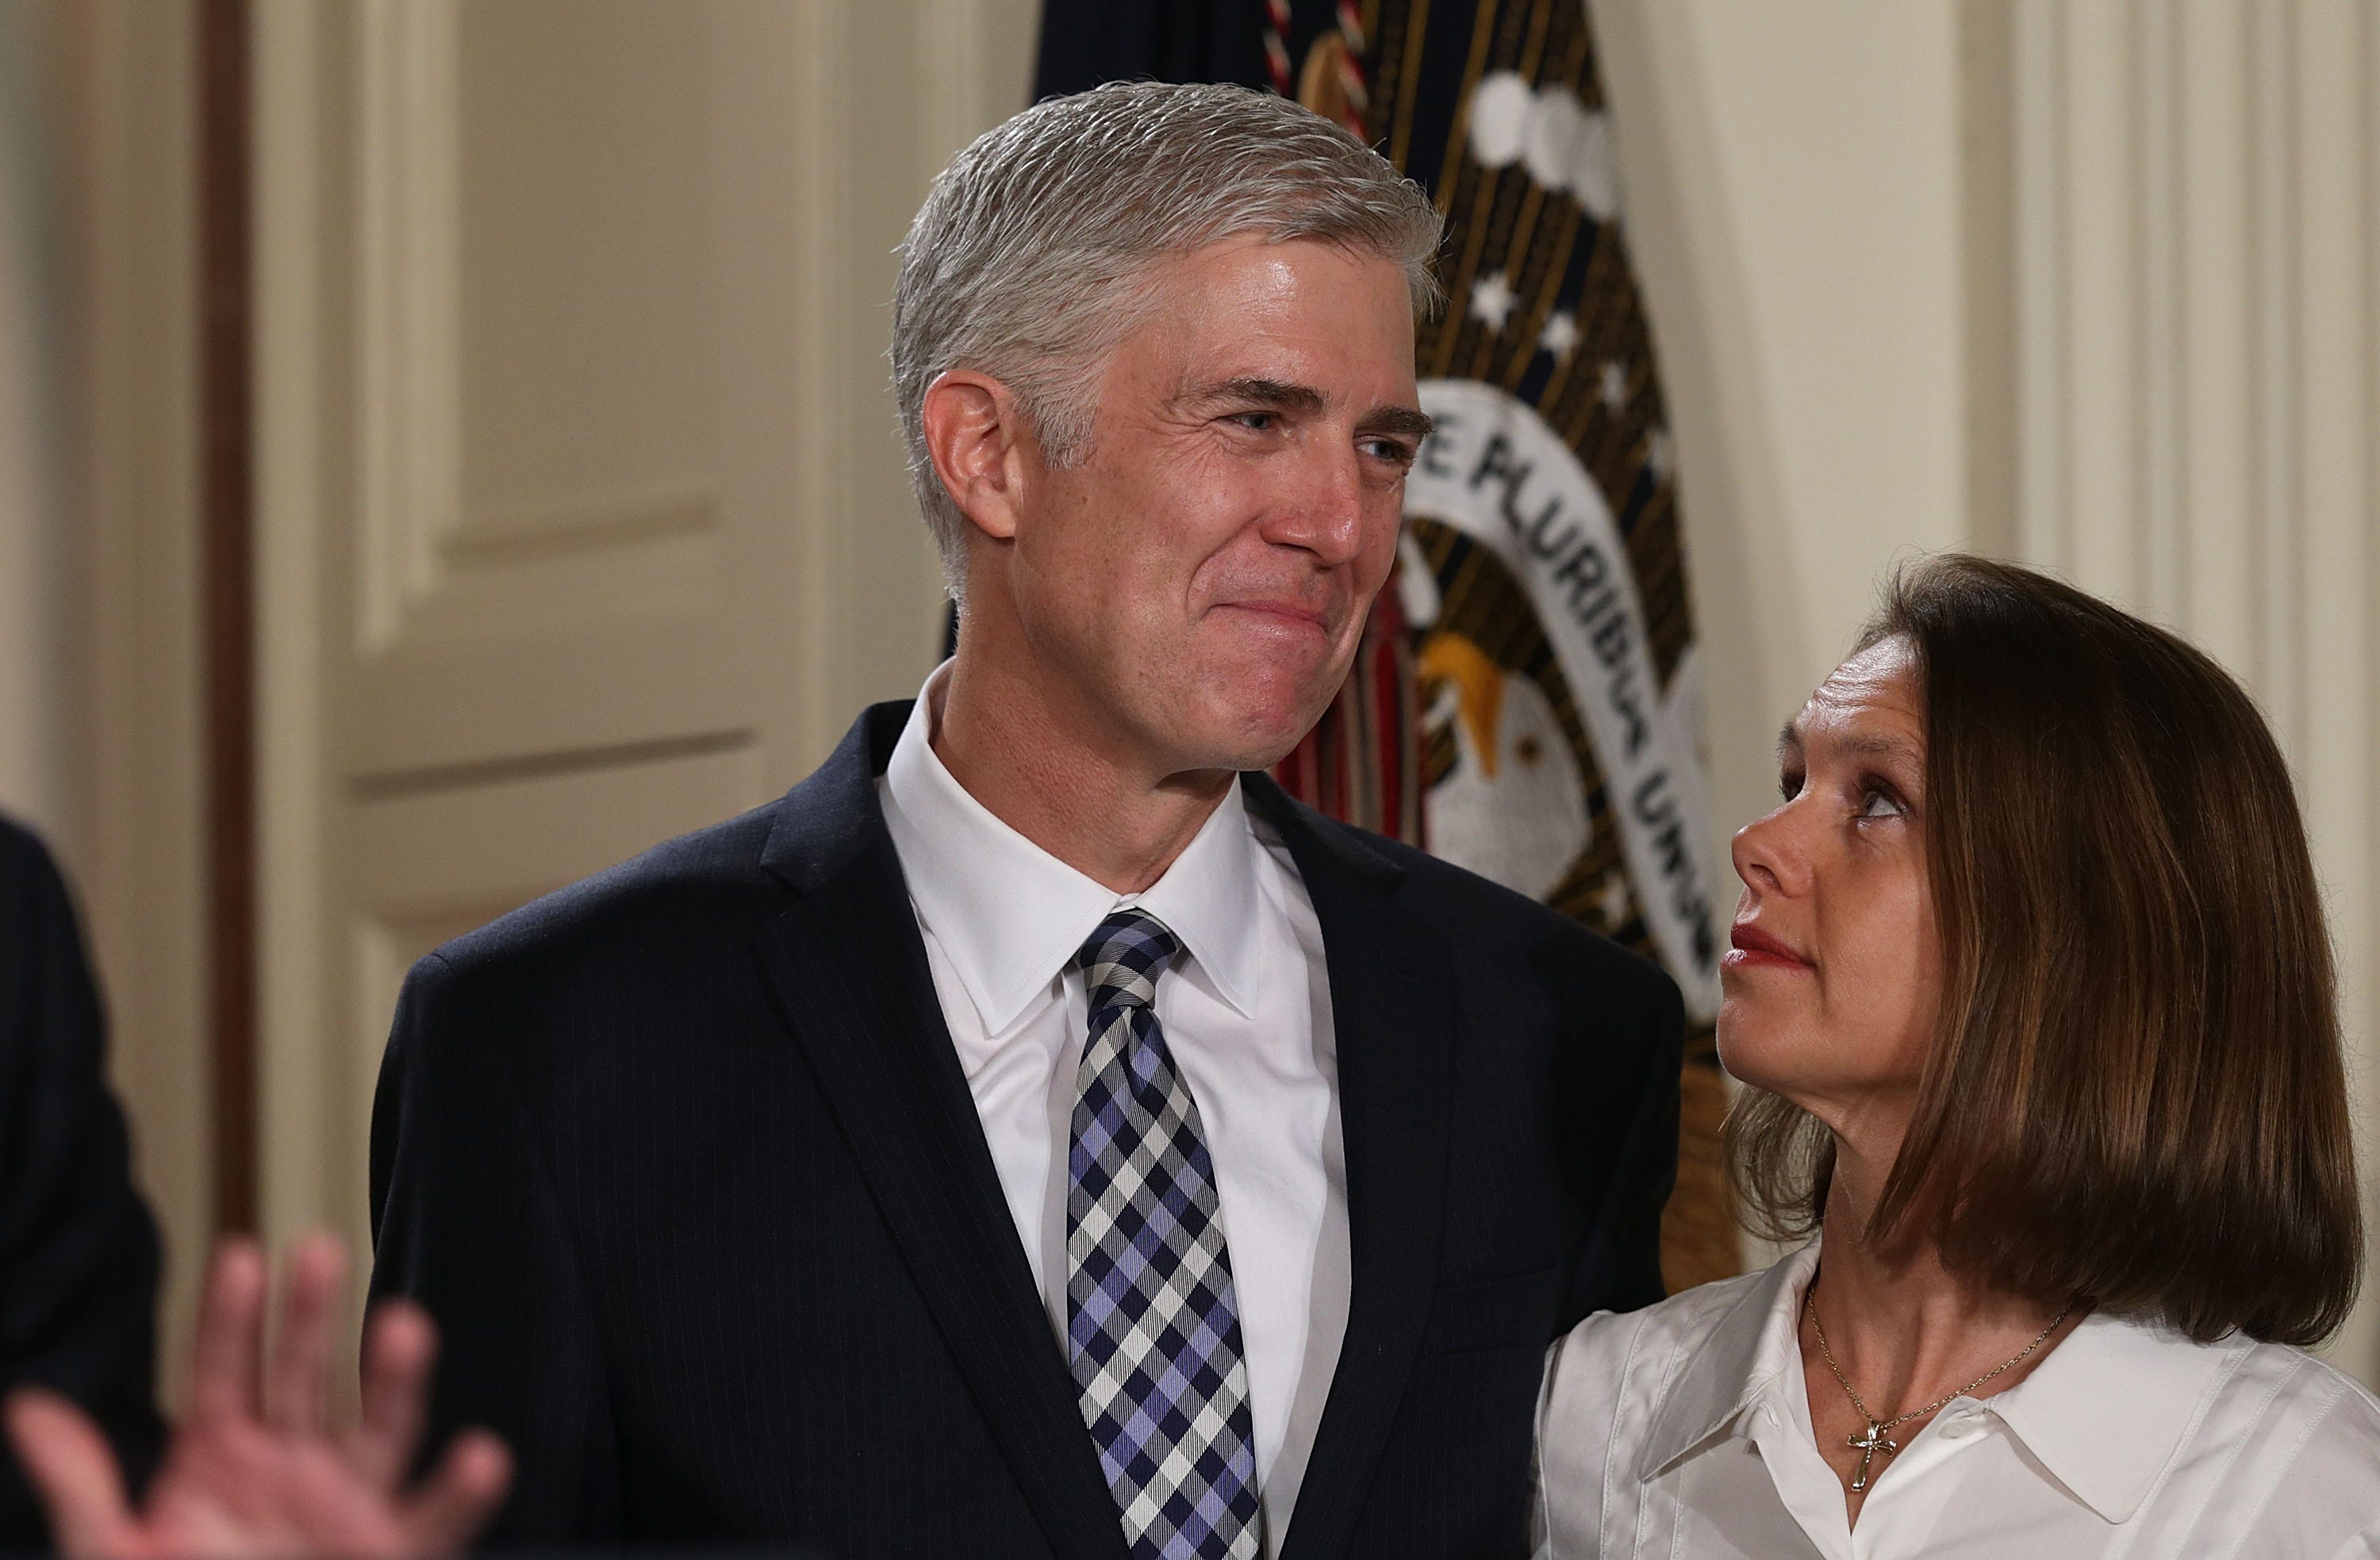 Who is Neil Gorsuch? A guide to the Supreme Court nominee